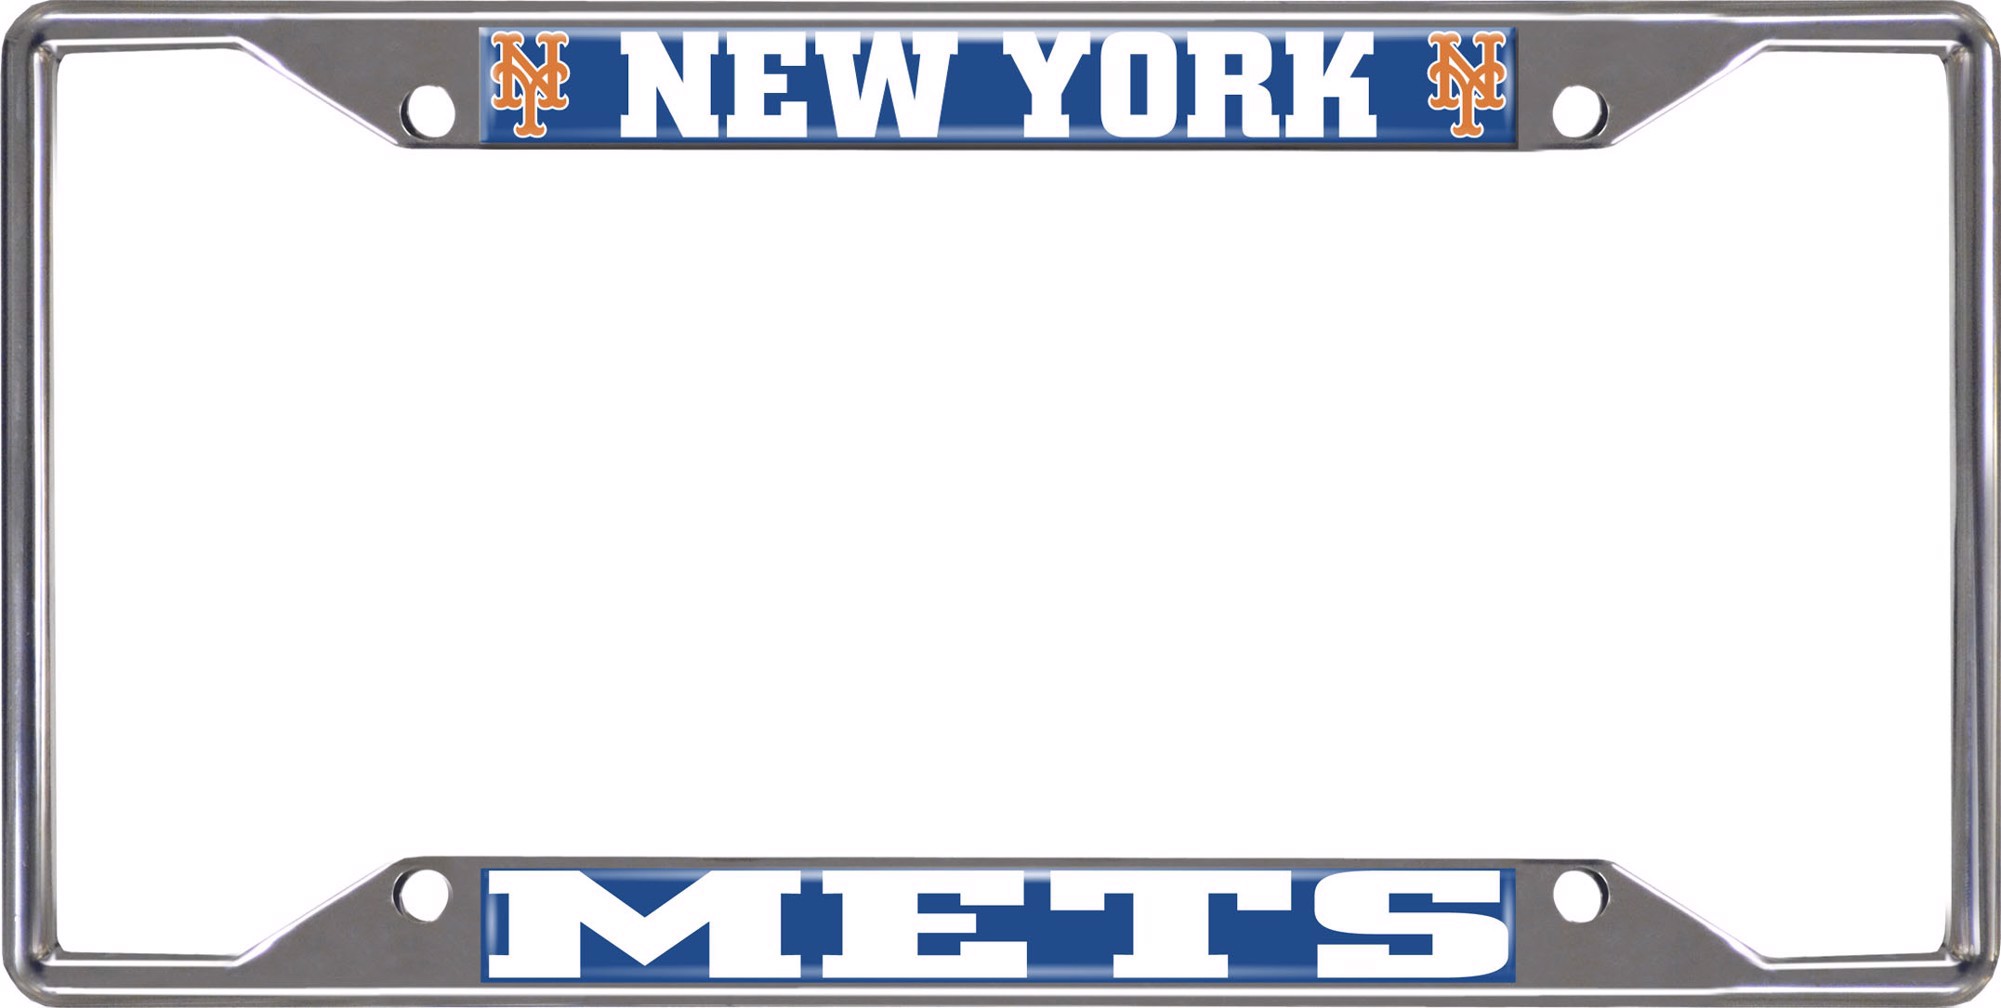 Fanmats New York Mets License Plate Frame